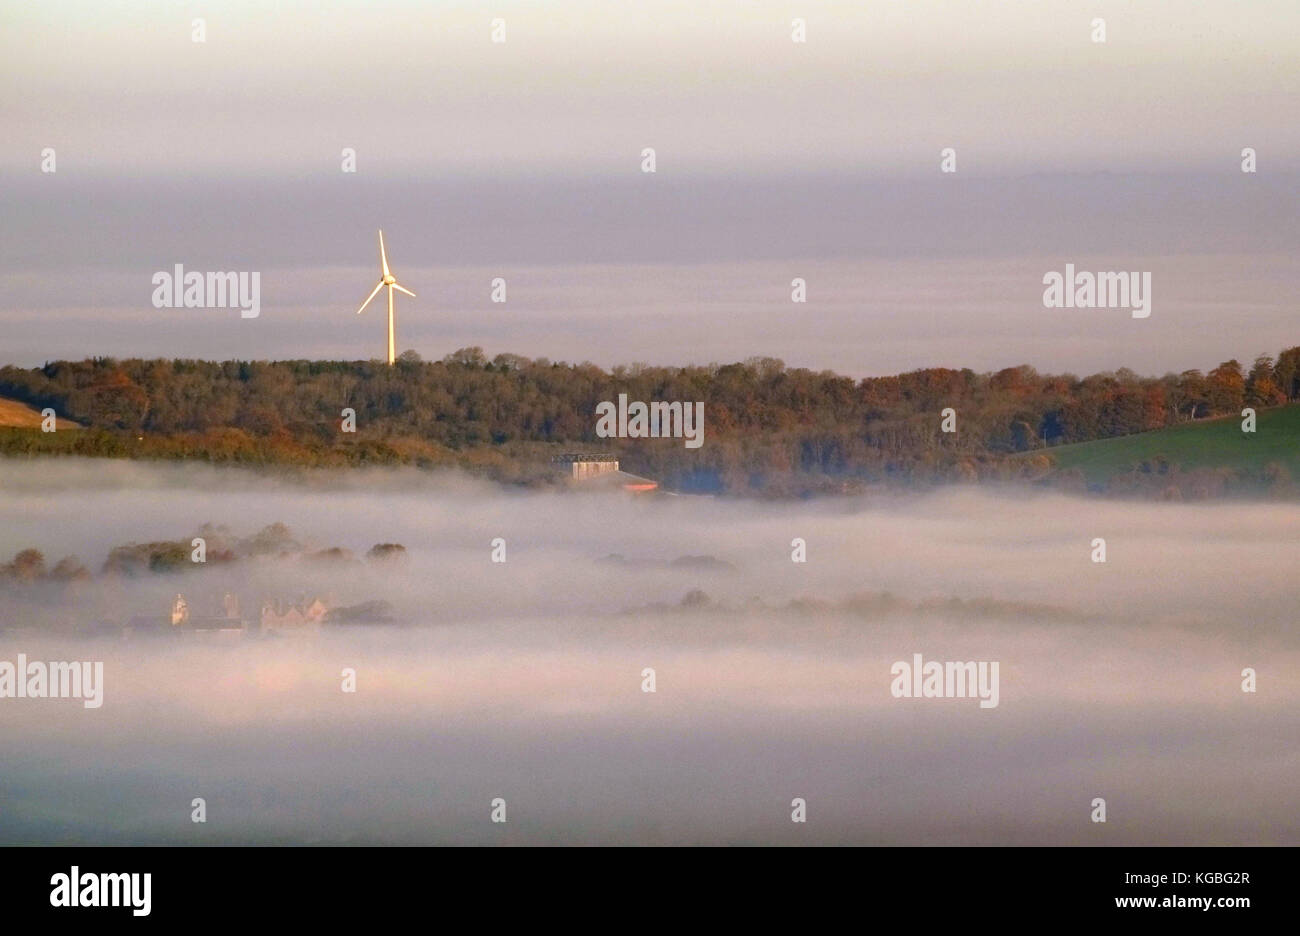 Lewes, East Sussex. 6th November 2017. A sea of mist surrounds the wind turbine above Glyndebourne Opera House, East Sussex, on a frosty but bright start to the week. © Peter Cripps/Alamy Live News Stock Photo